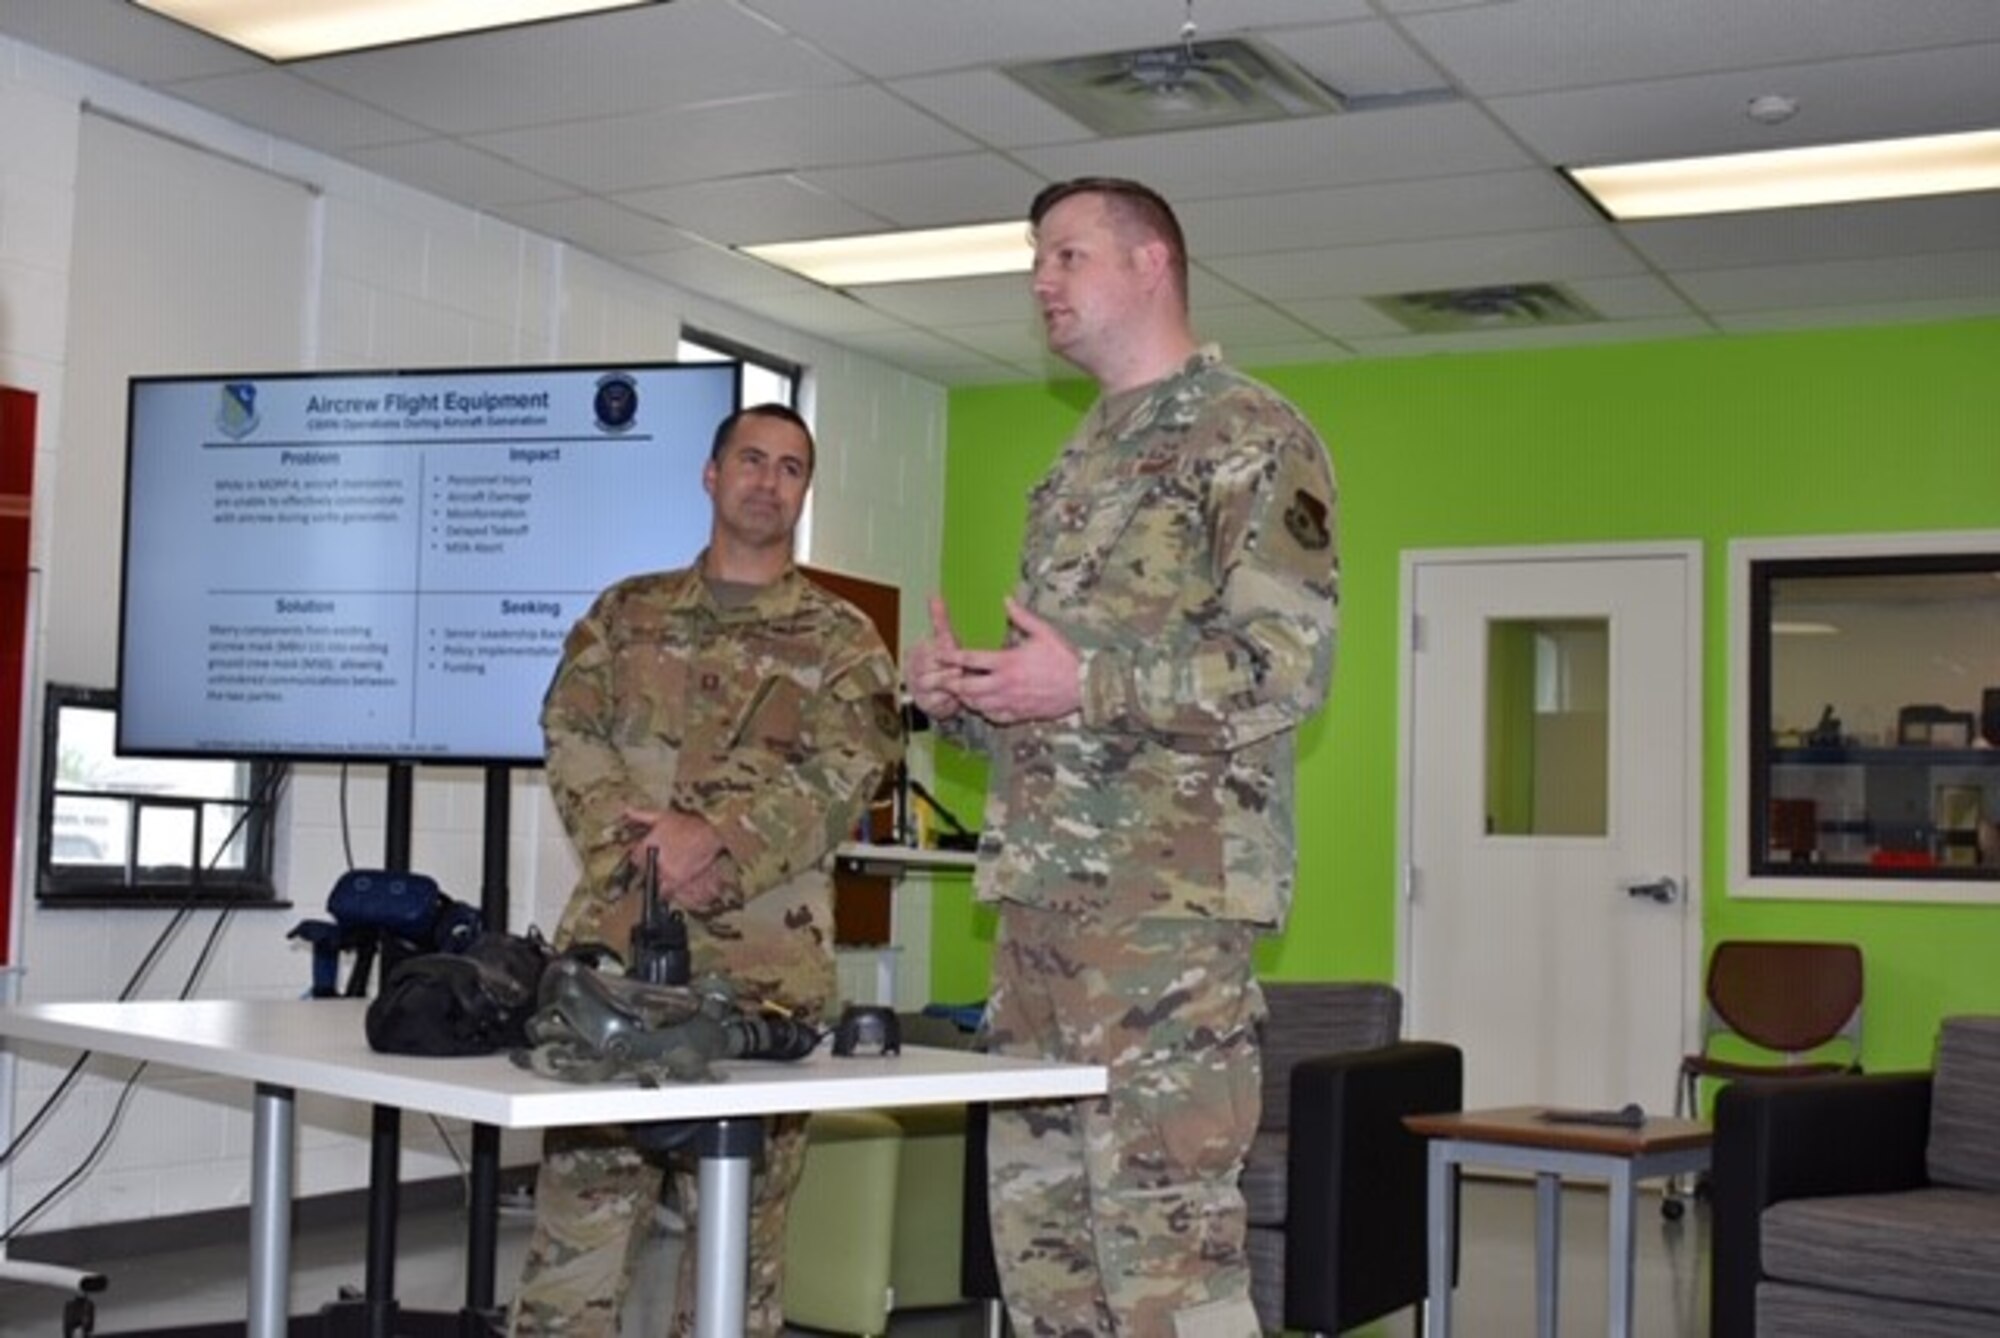 Photo shows two Airmen standing while addressing a room.